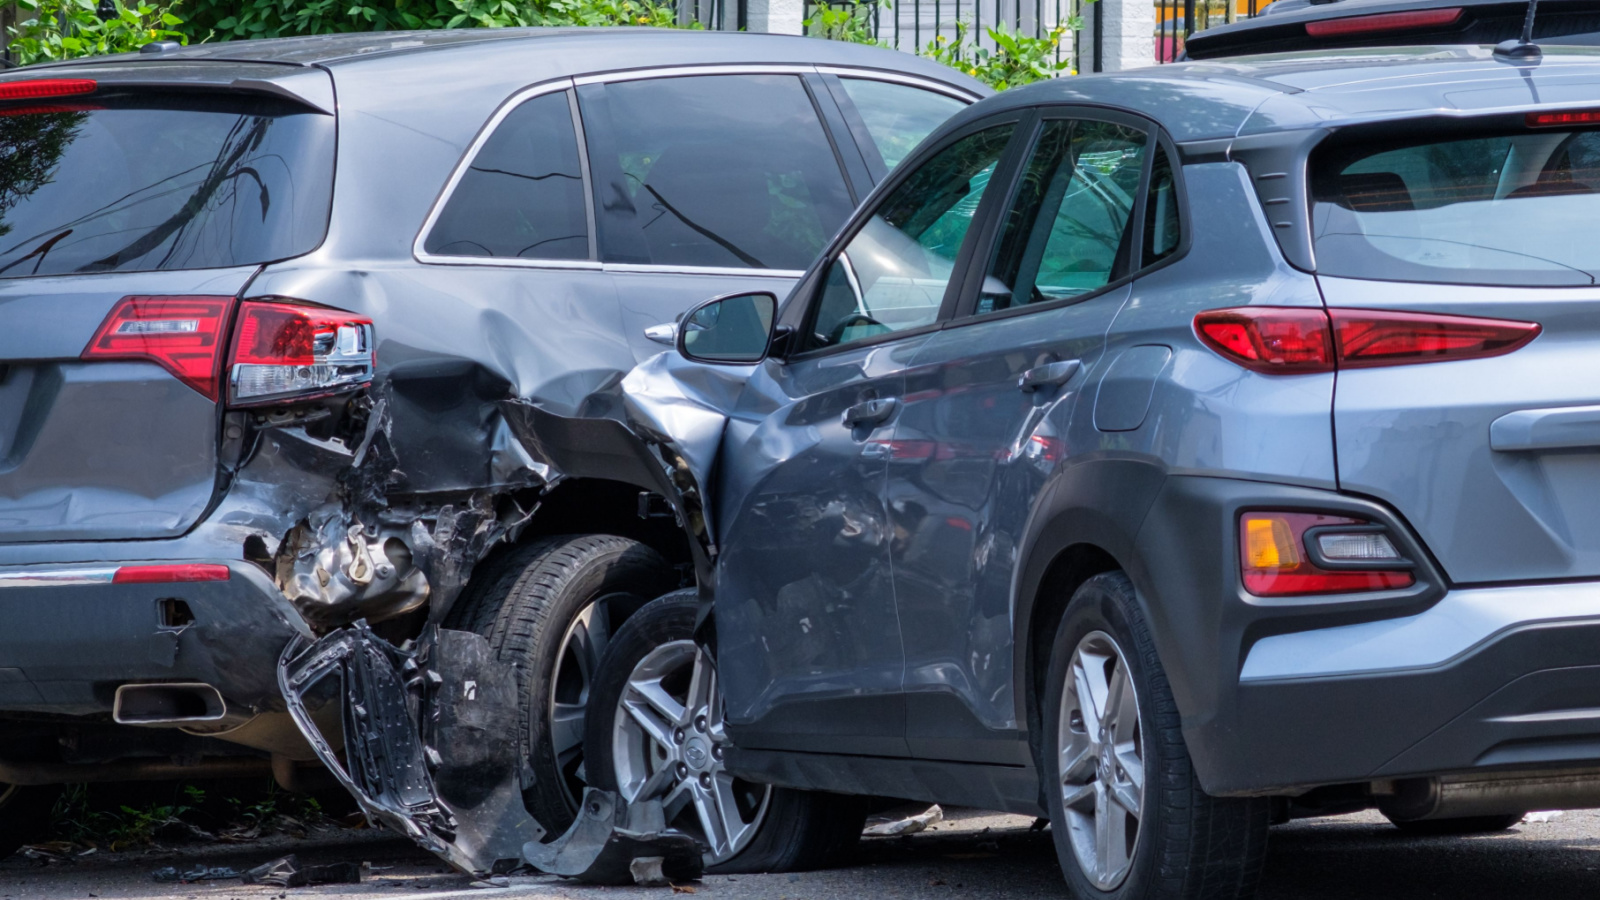 Summer Heat Brings More St. Louis Auto Crashes | Car Accident Lawyers in Missouri and Illinois | Auto Accident Law Firm Near Me